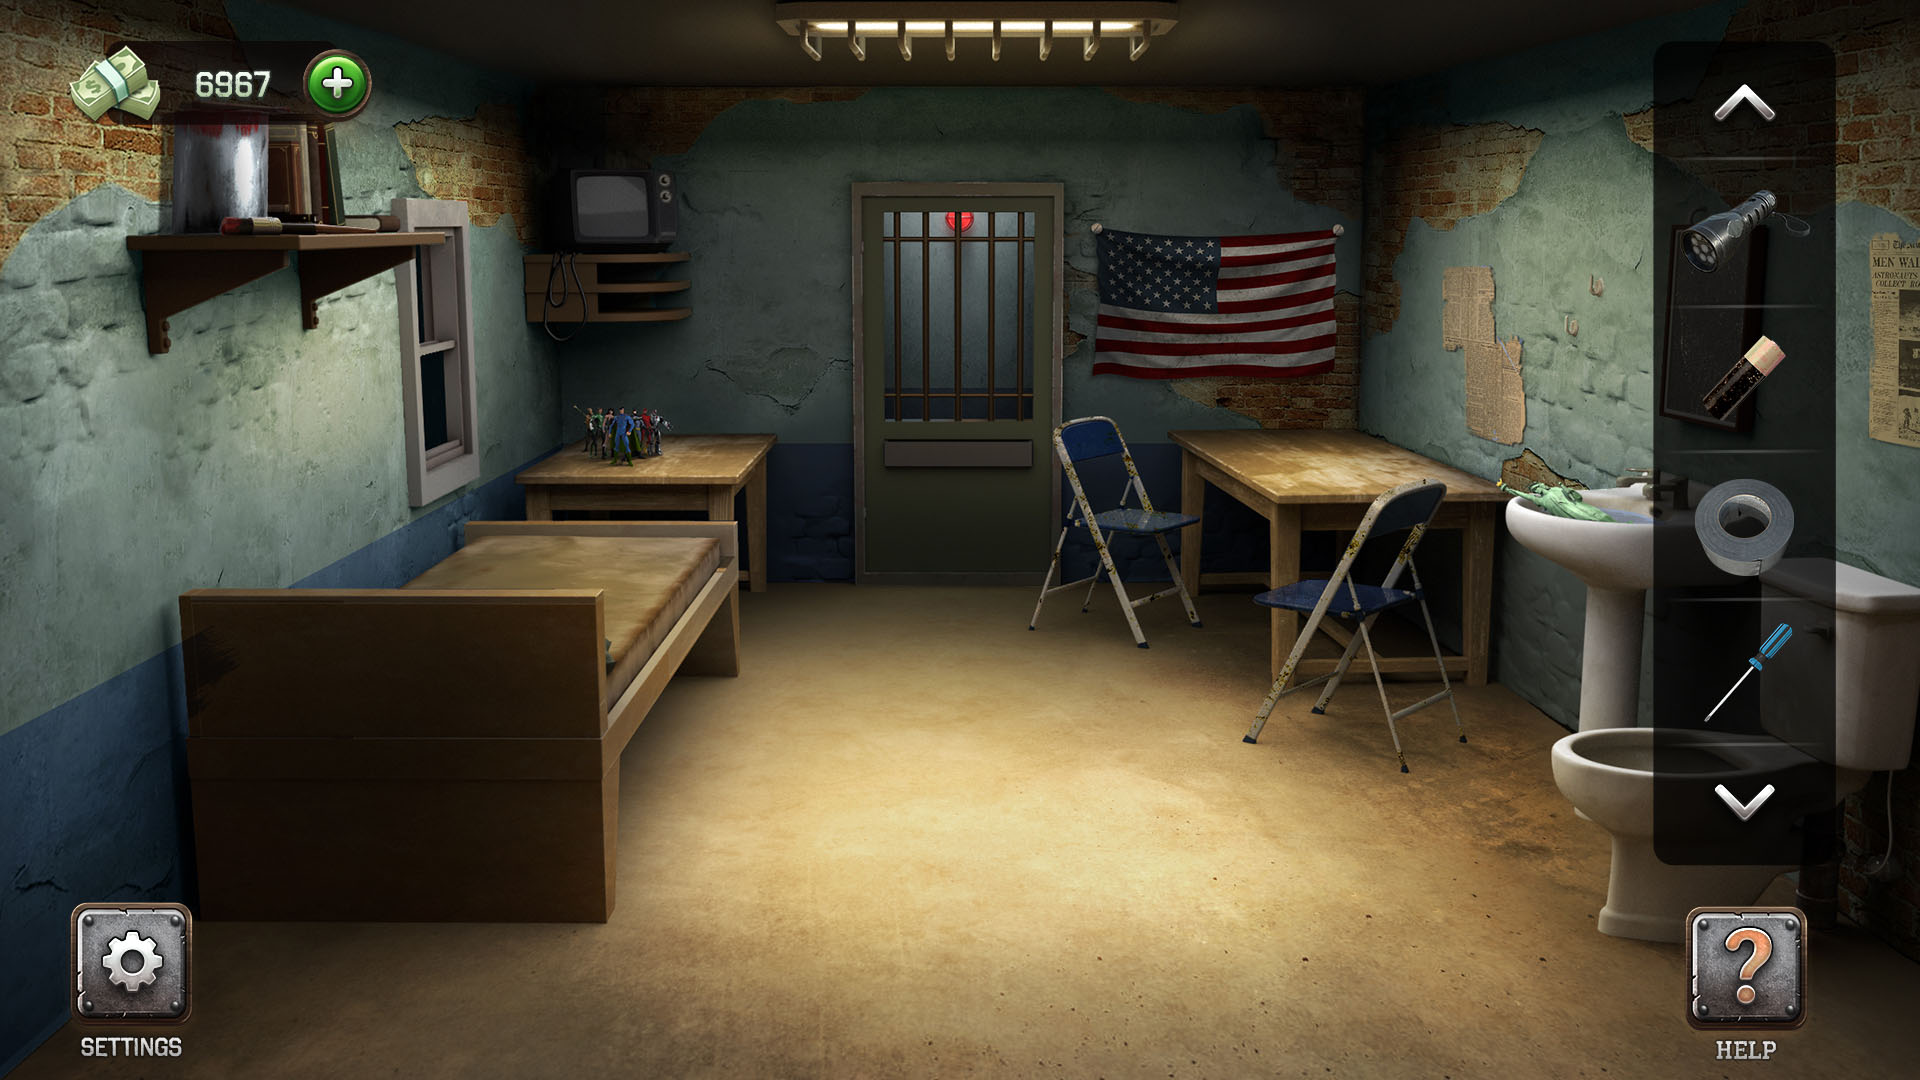 Full version of Android Hidden objects game apk 100 Doors - Escape from Prison for tablet and phone.